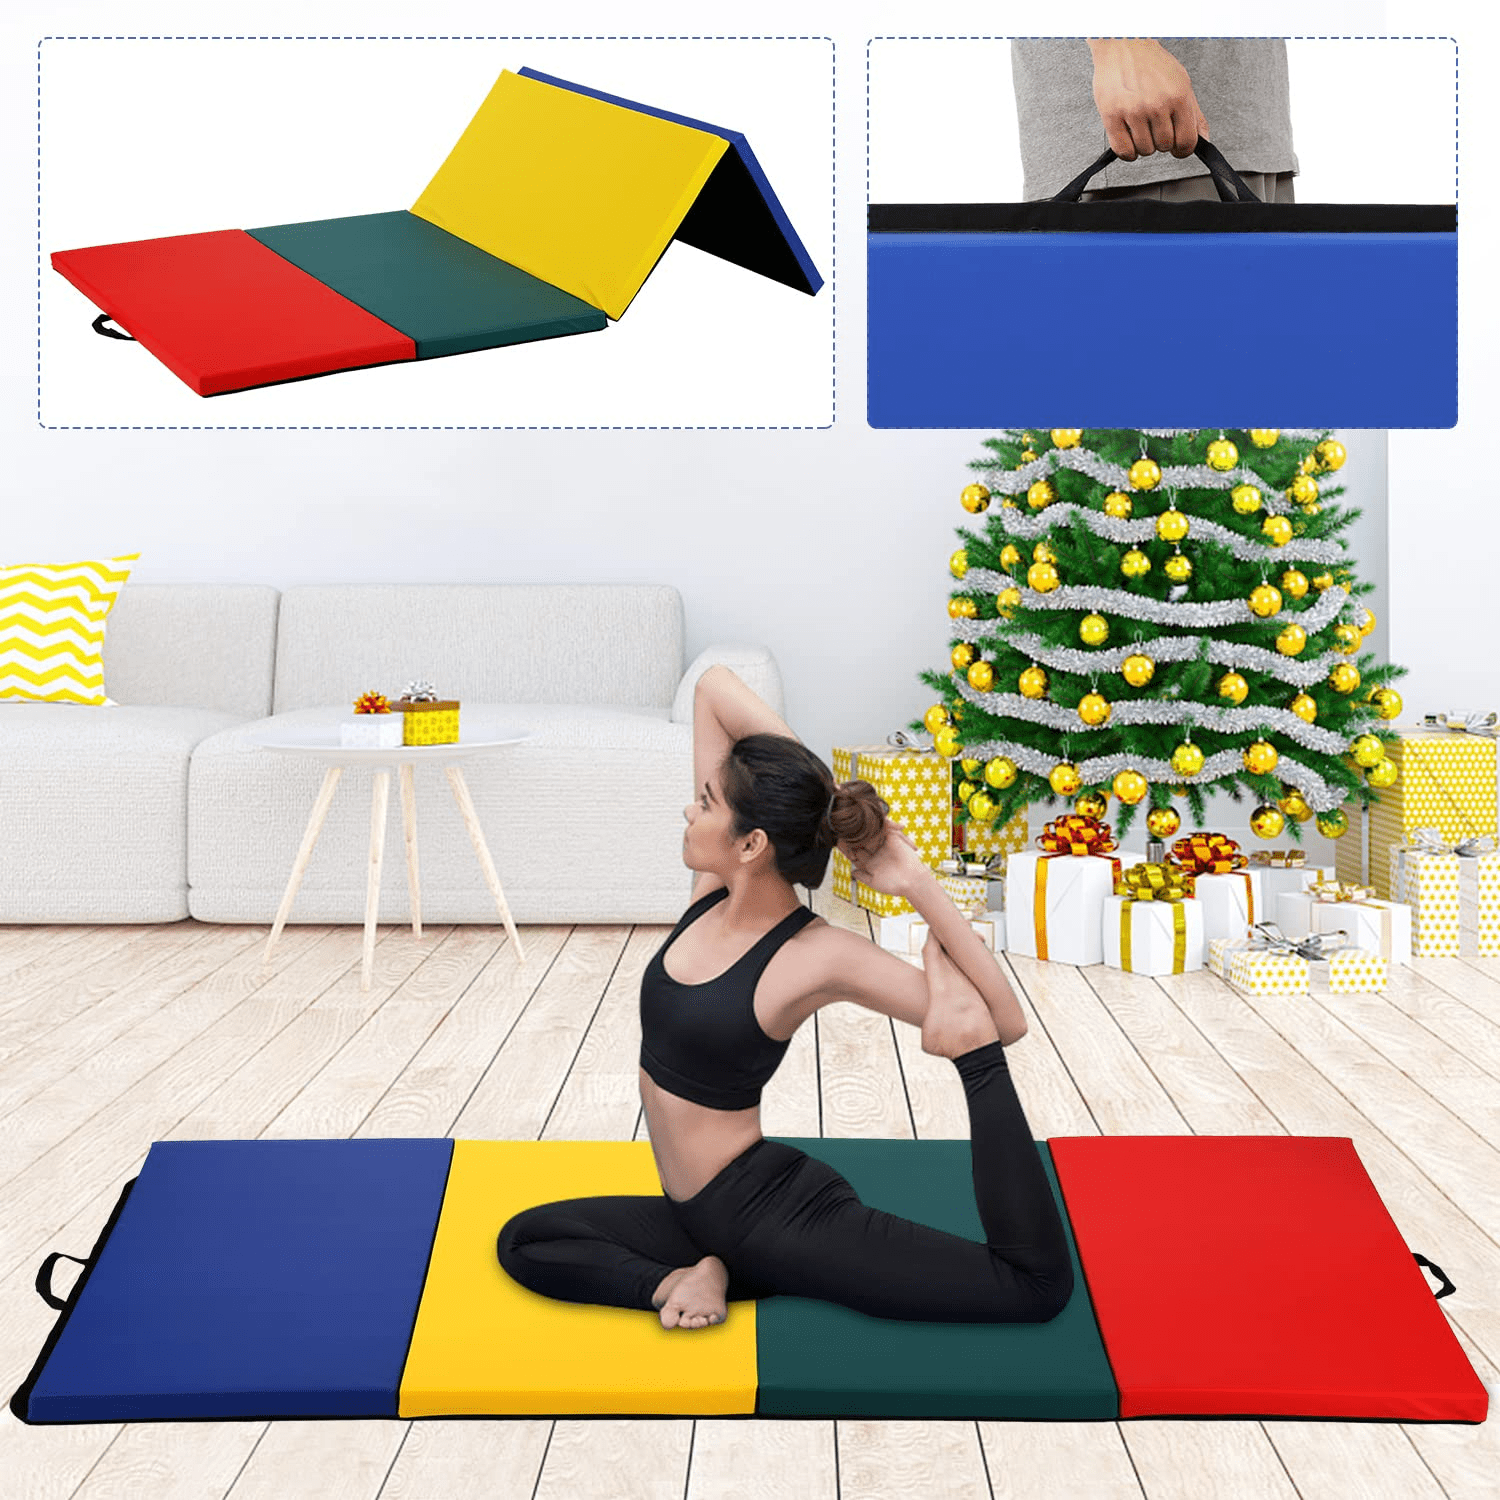 Instant Wrestling Room 8' x 8' wrestling mat and Removable Roll Up Wal